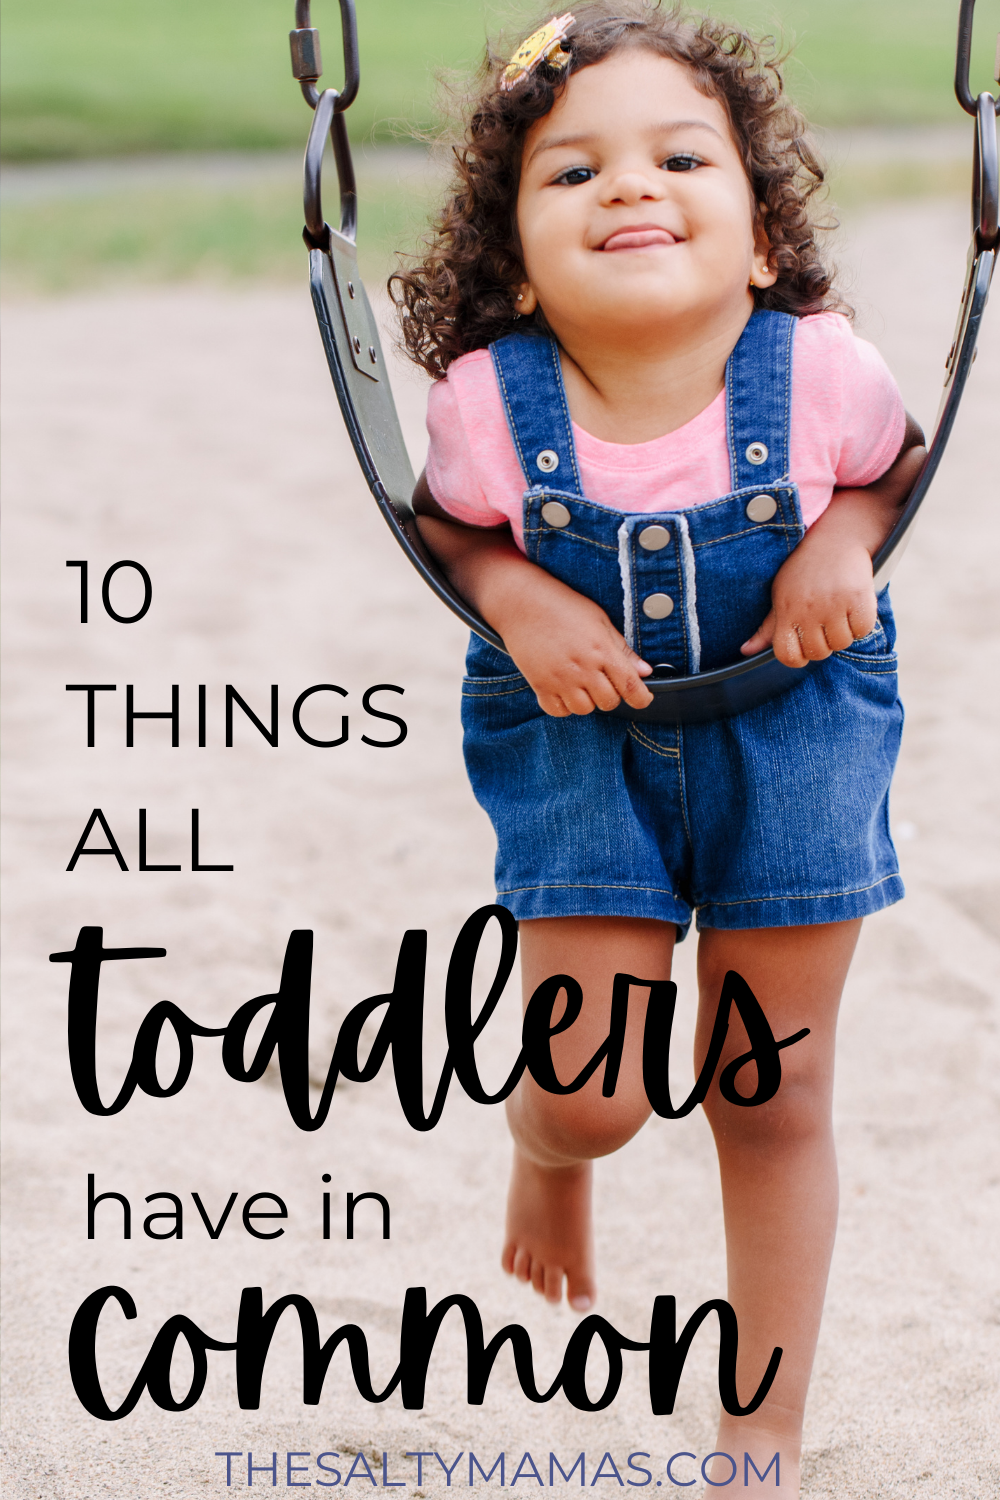 toddler on swing; text: 10 things all toddlers have in common